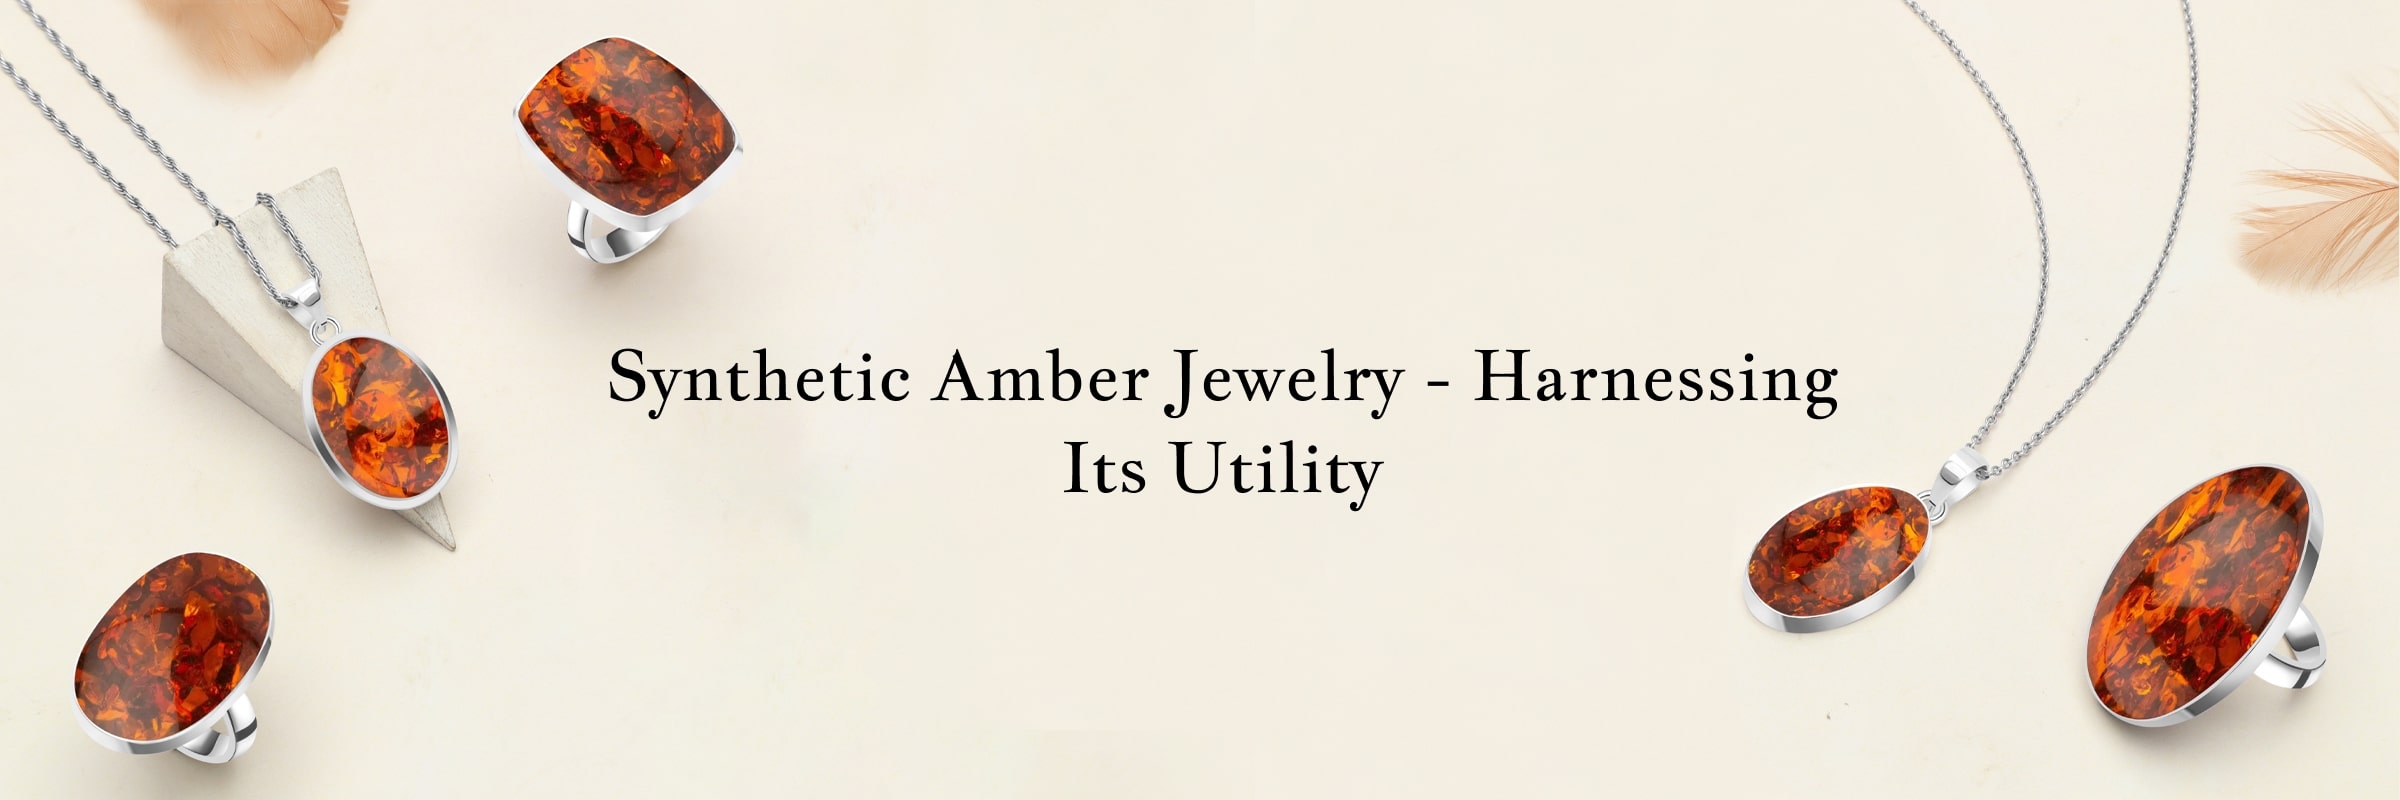 Uses of Synthetic Amber Jewel